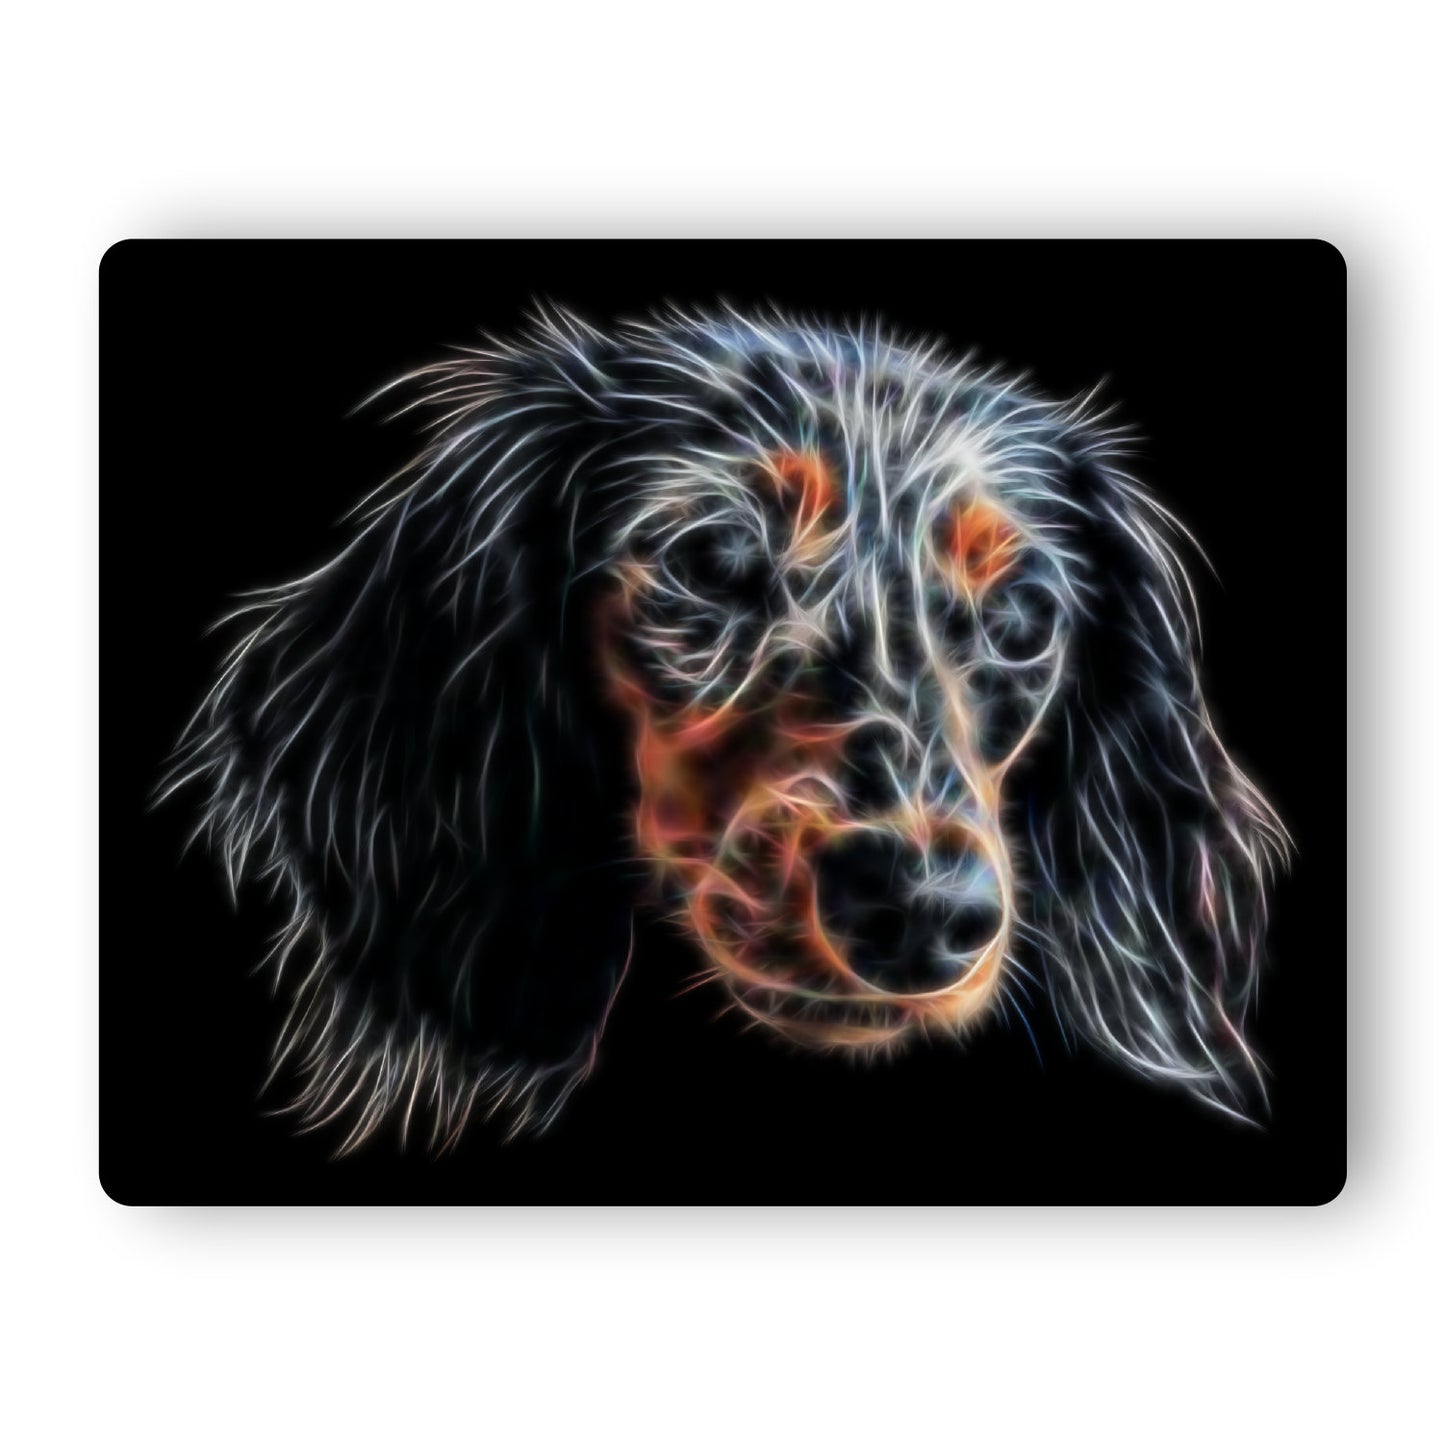 Tricolour Dachshund Metal Wall Plaque. Also available as Mouse Pad, Keychain or Coaster.